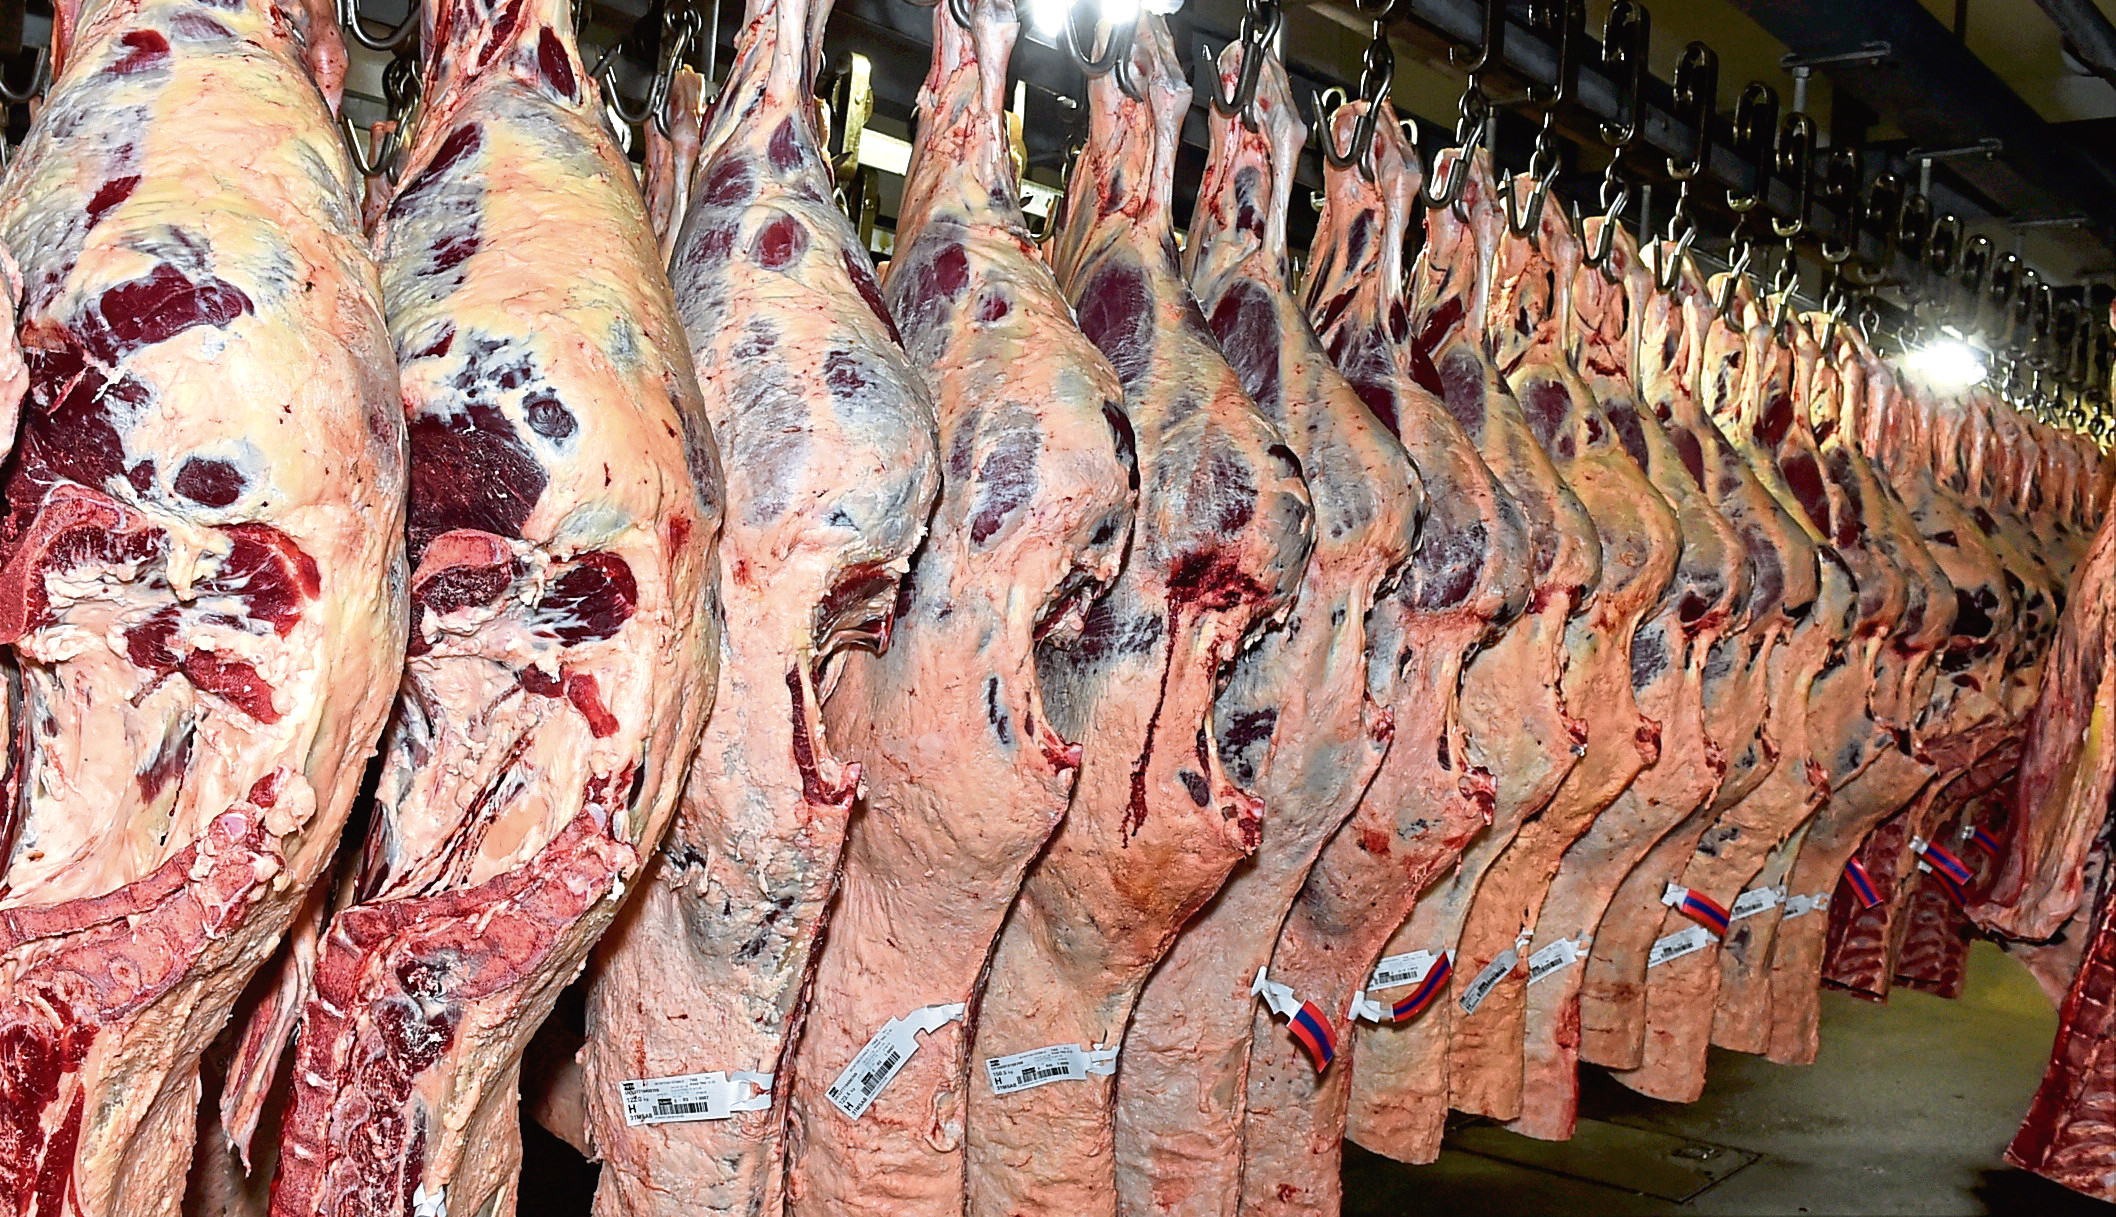 The report warns of increased administrative costs for exporting red meat to Europe in the event of a no-deal Brexit.